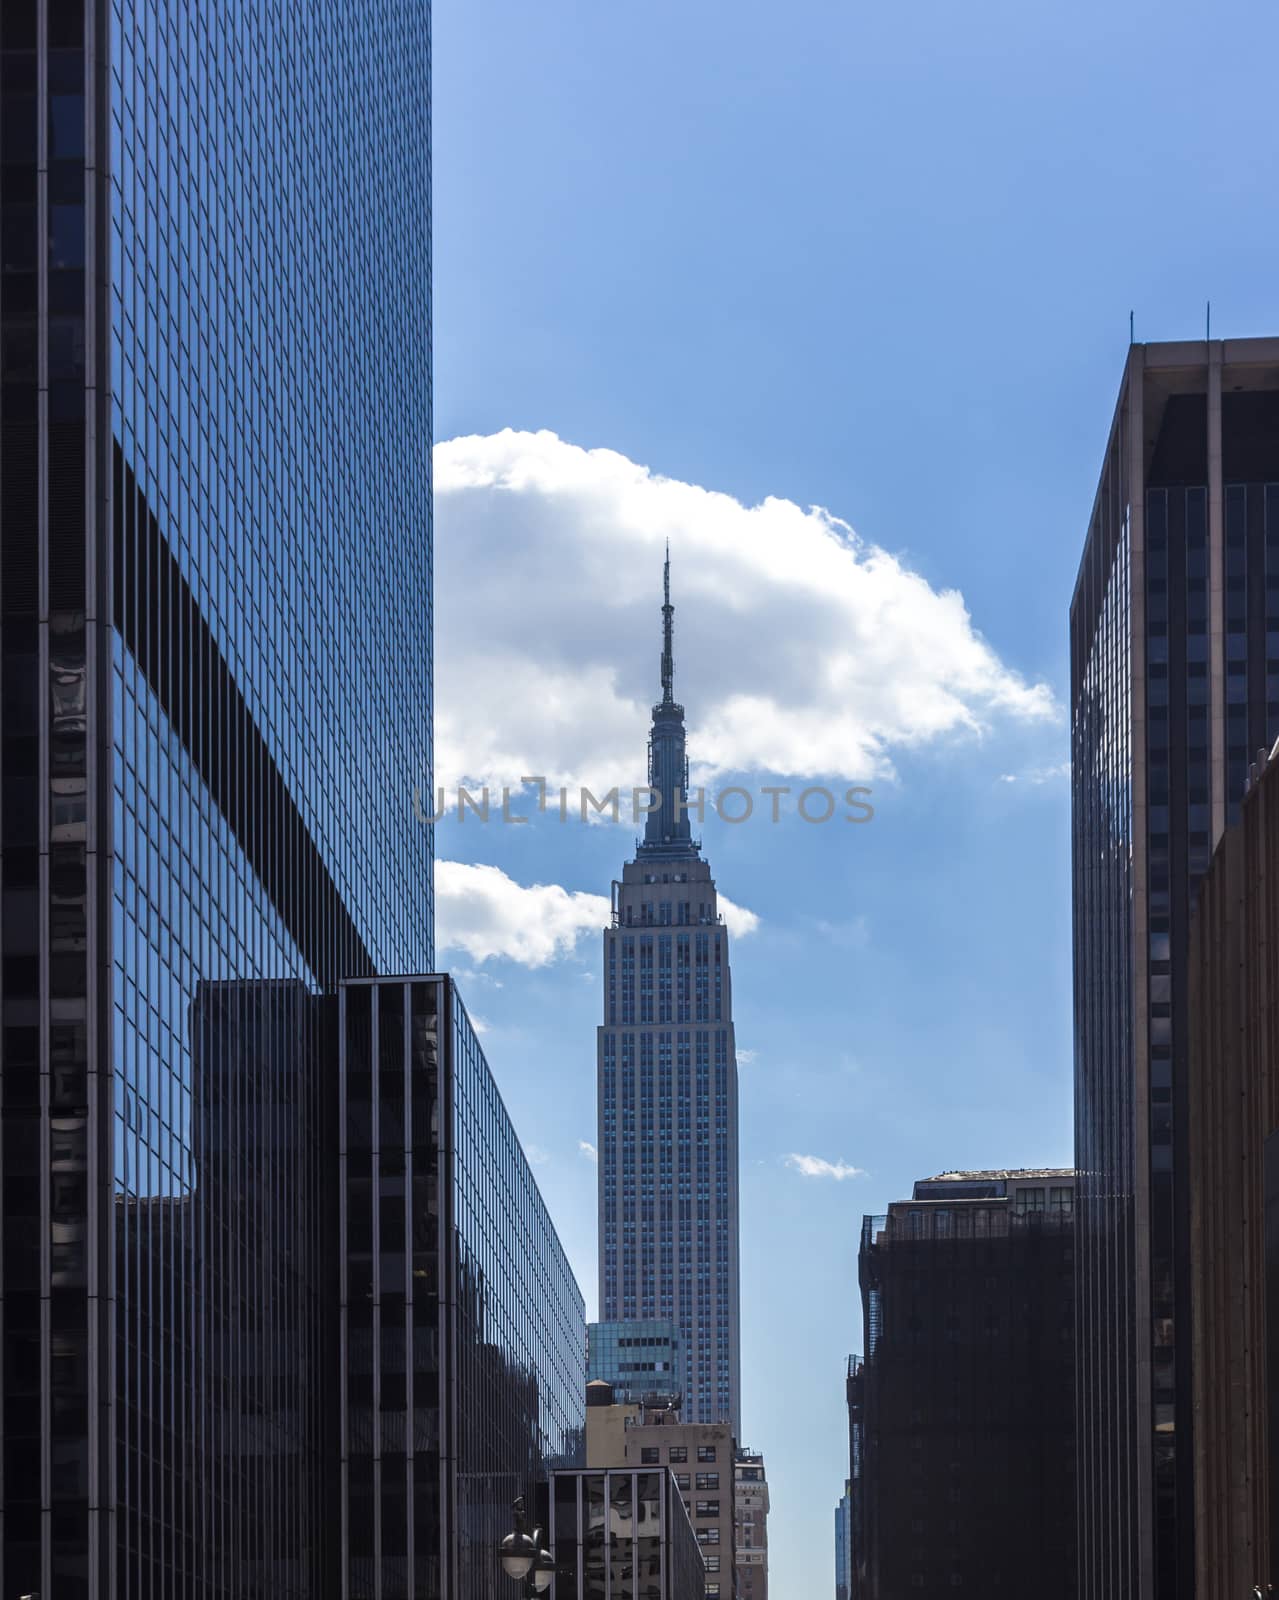 The Empire State Building is a 102-story landmark and American cultural icon in New York City.